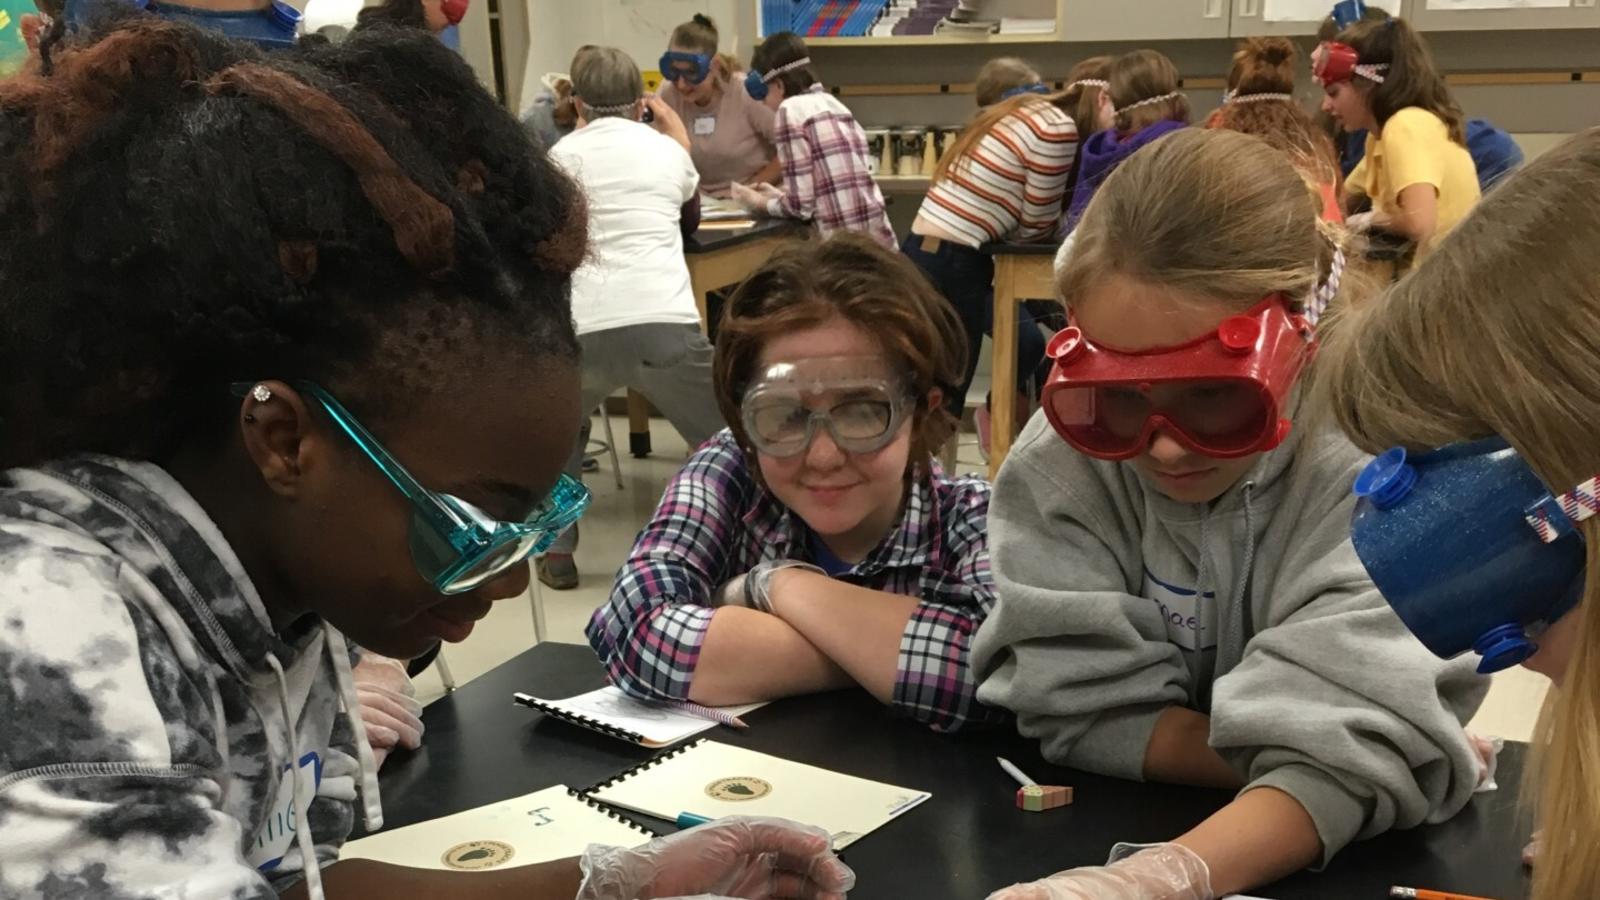 Six young girls crowd around a science lab table working on an activity. Other tables of children can be seen working in the background.